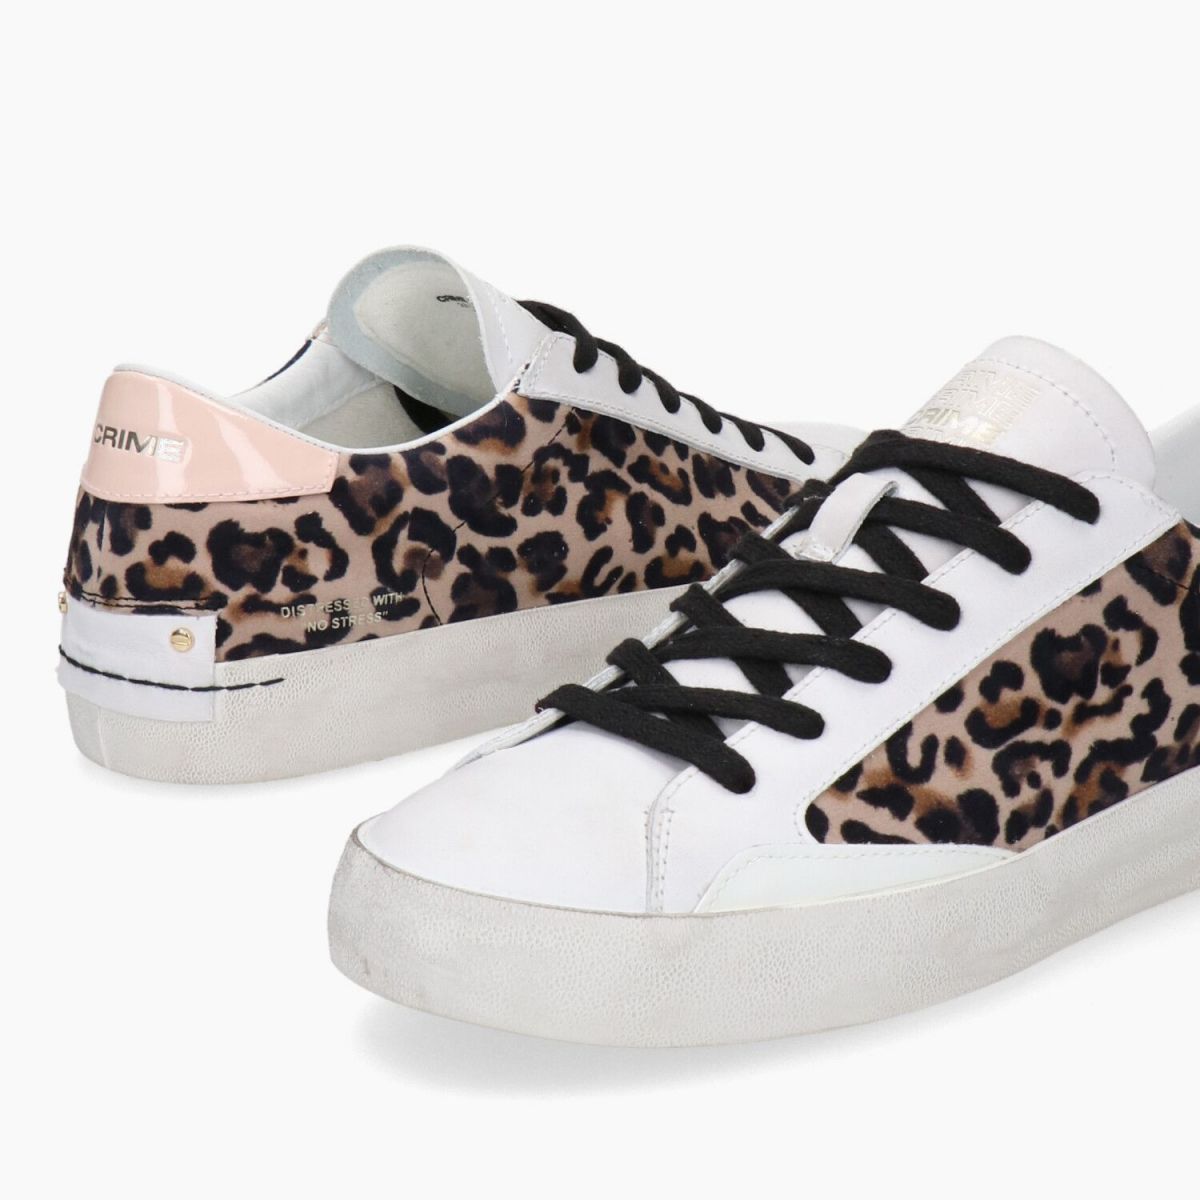 Crime London Sneakers Low Top Distressed Maculato 23111PP4-MACULATO-022